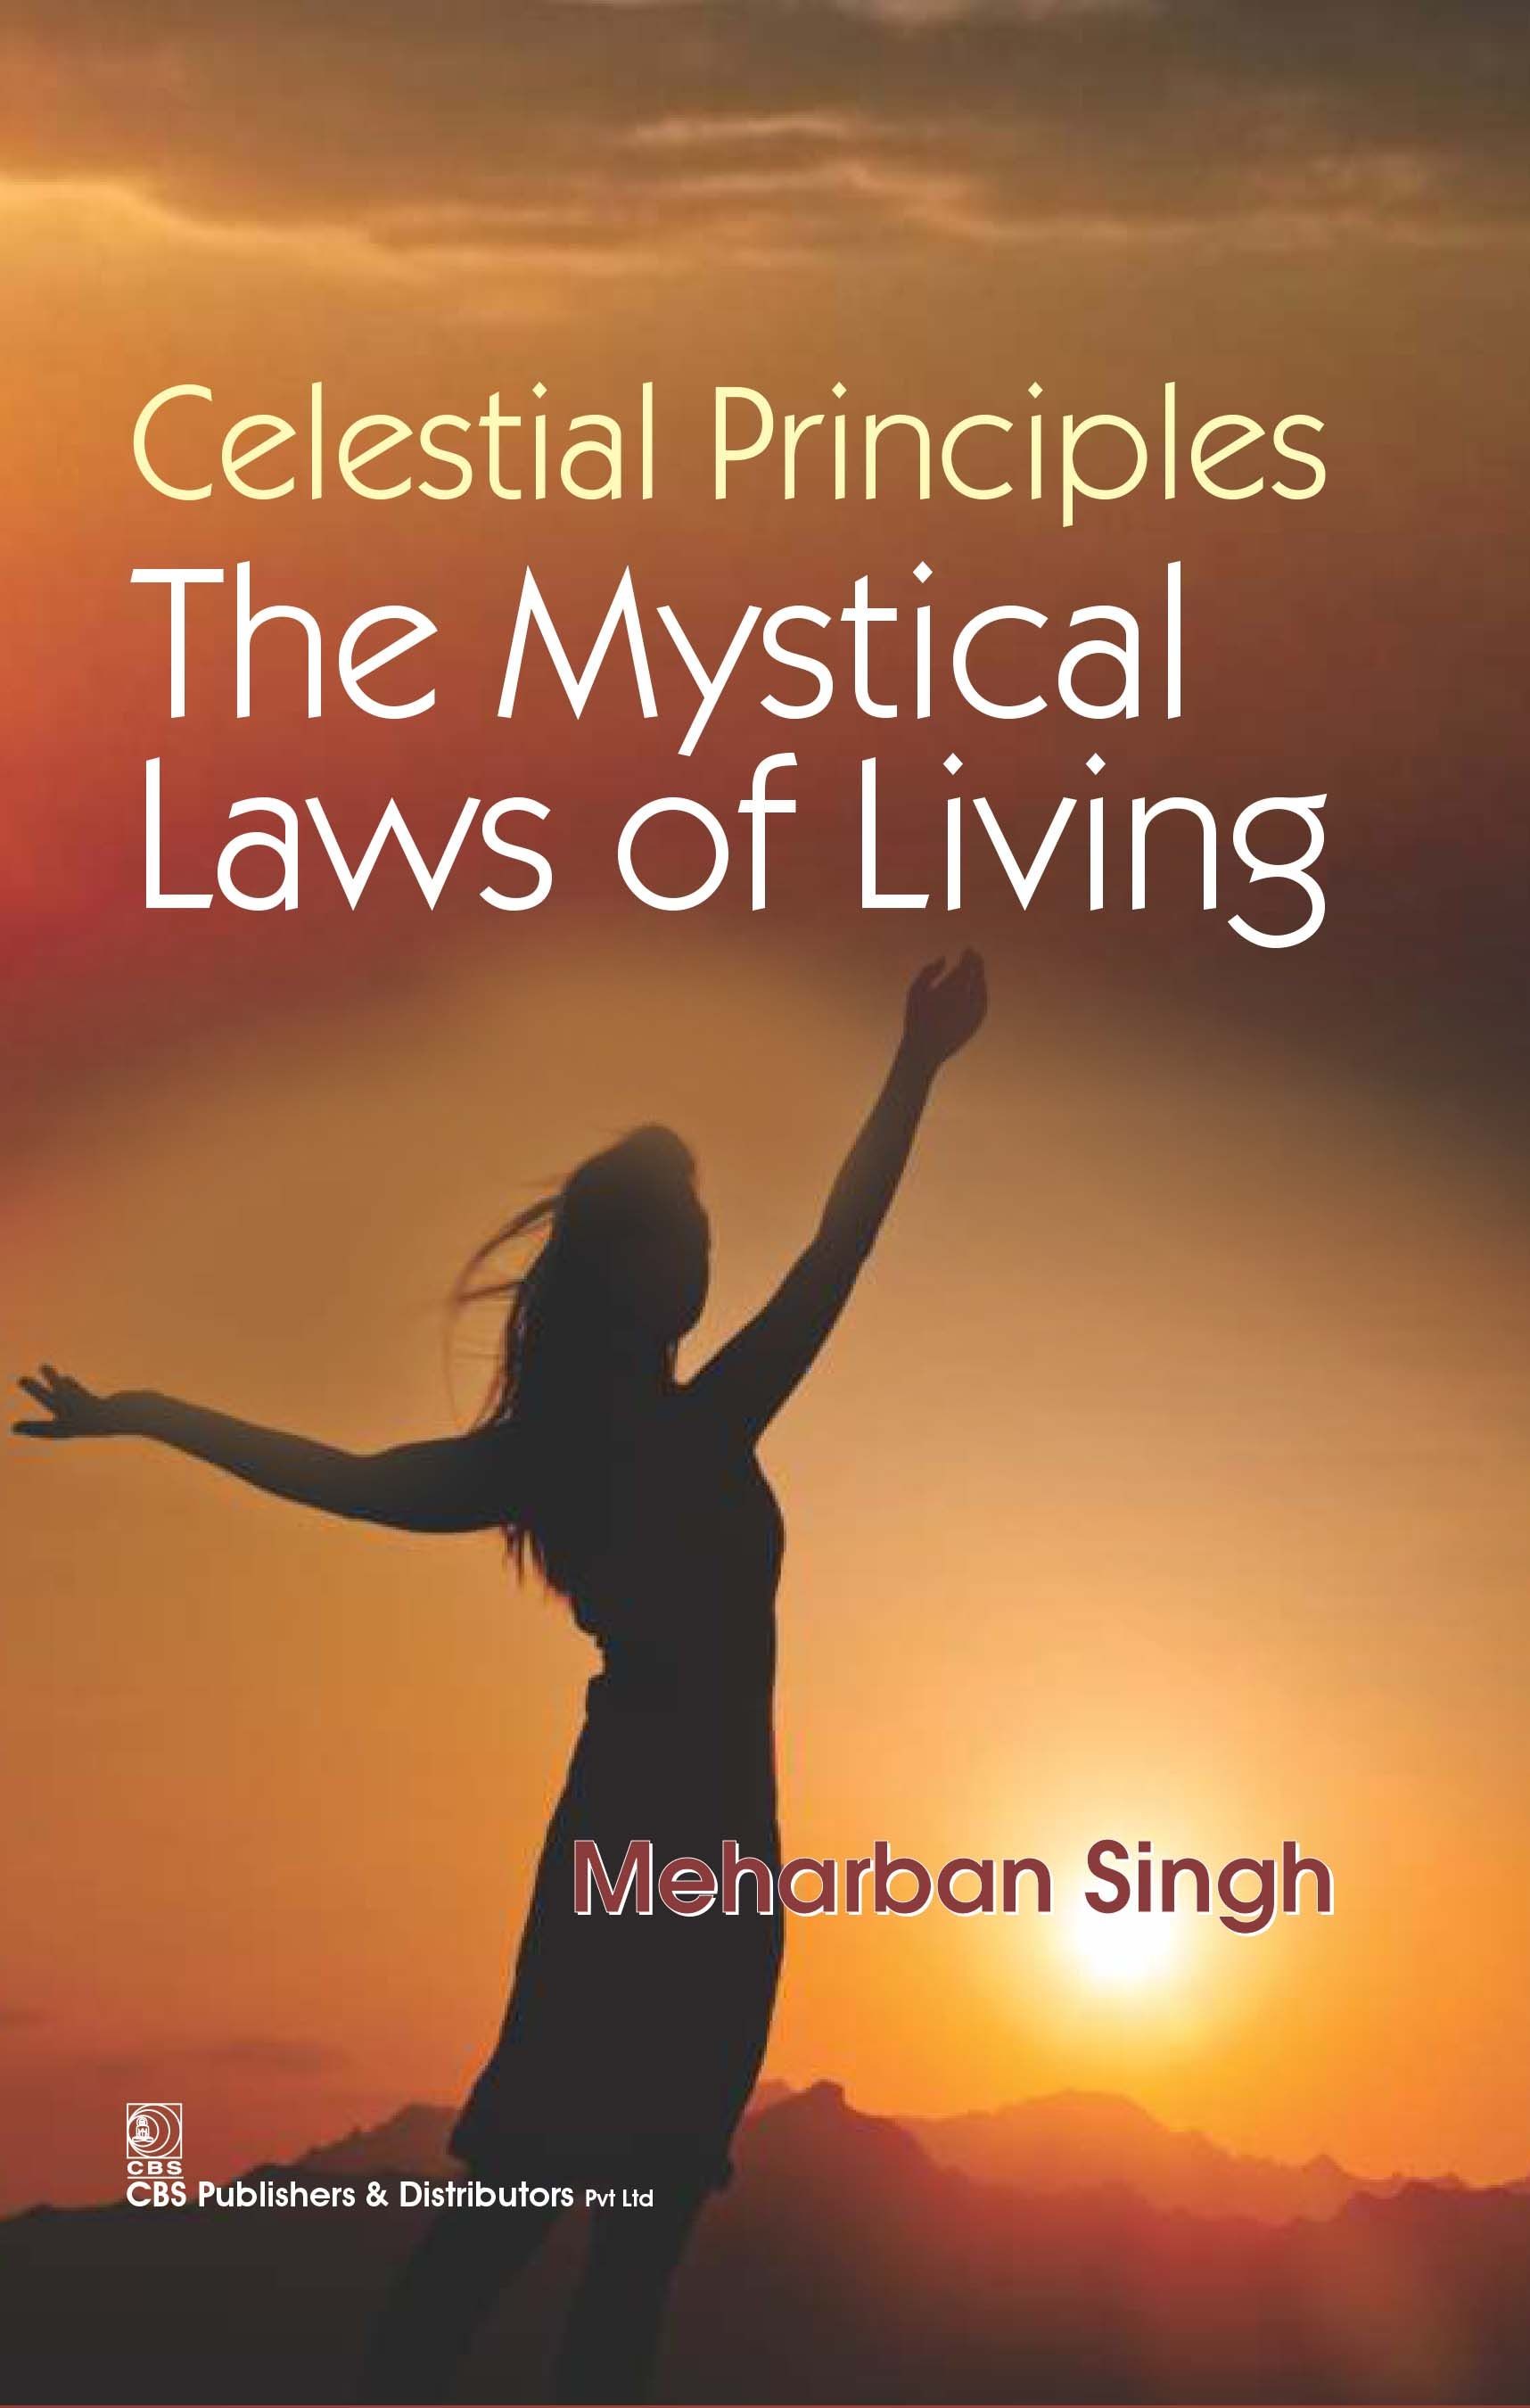 Celestial Principles The Mystical Laws Of Living (Pb 2016)